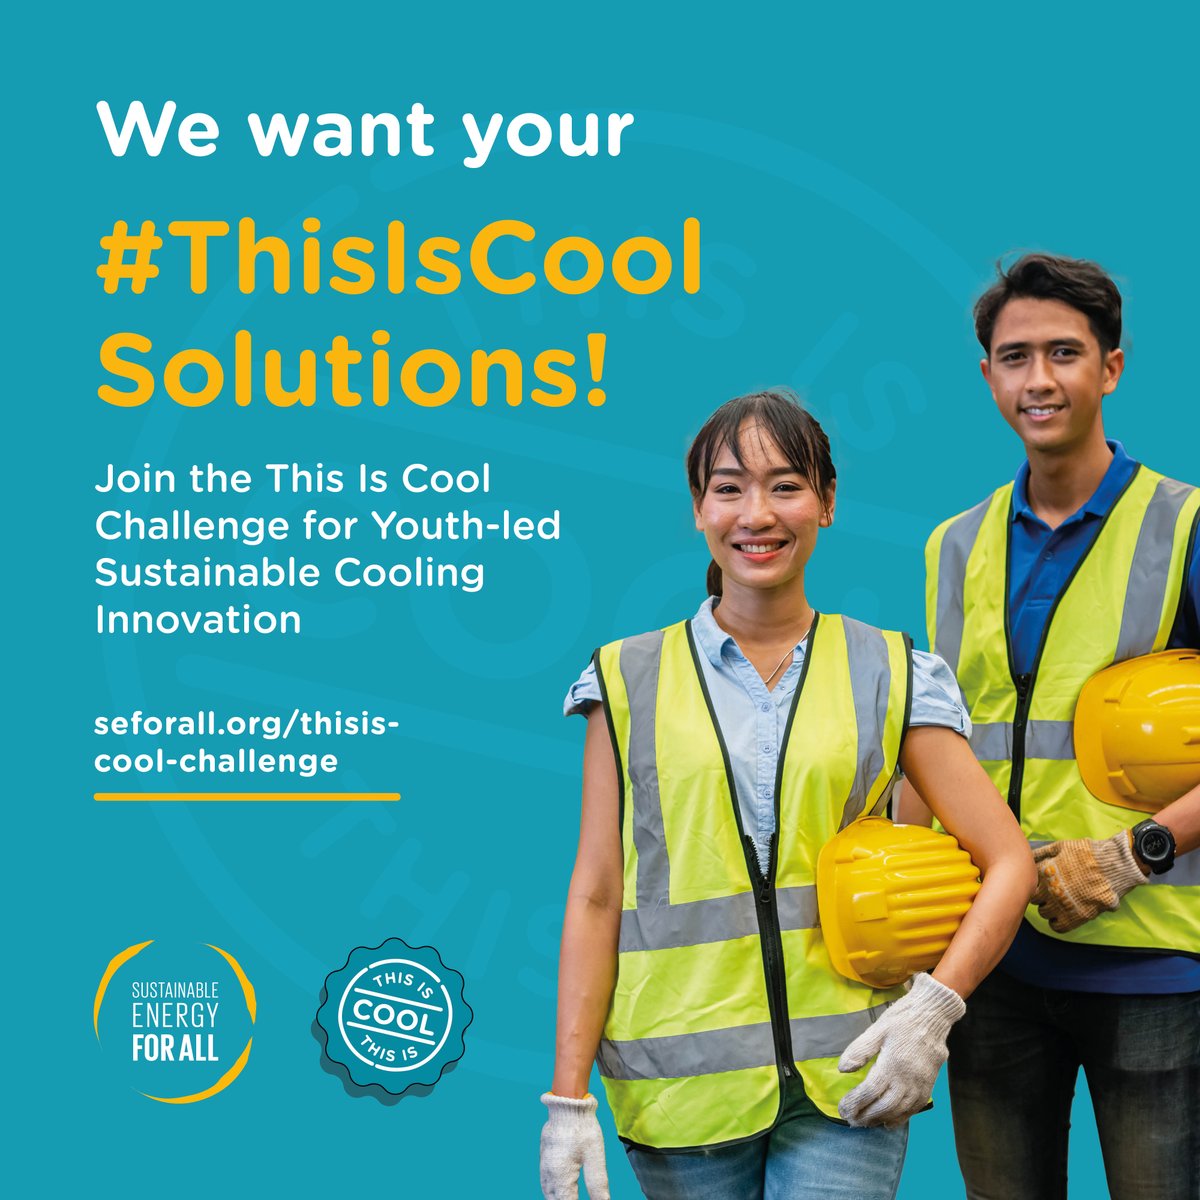 Join @seforallorg's #ThisIsCool Challenge ❄️ for youth-led #sustainablecooling innovations and you could receive a cash prize 💸 to implement your cooling project! 😎

Show us what you've got! Learn more and apply by Sept. 15 ➡️ seforall.org/news-and-event…